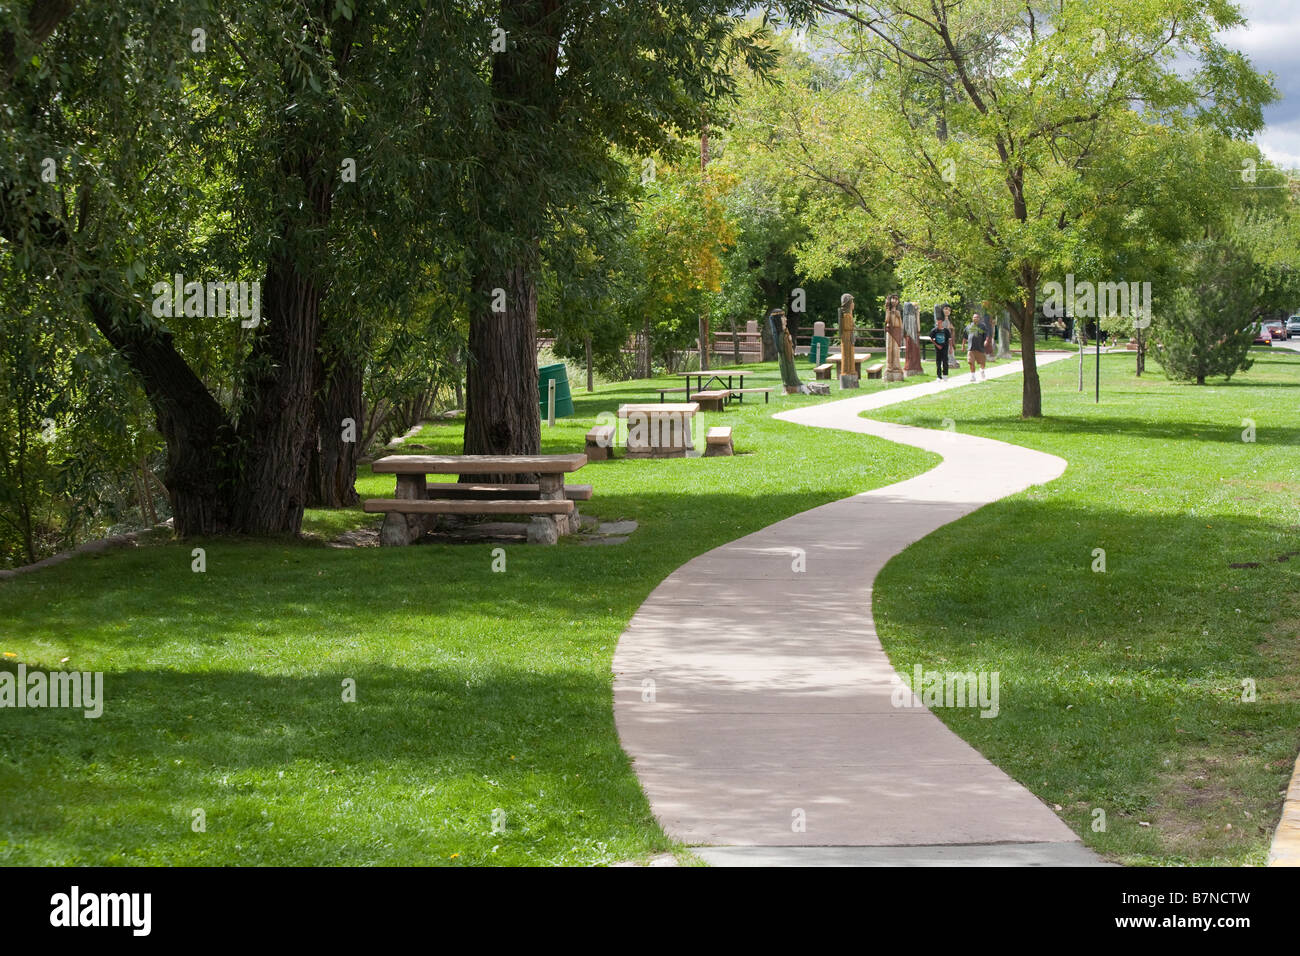 The Winding Path High Resolution Stock Photography and Images - Alamy